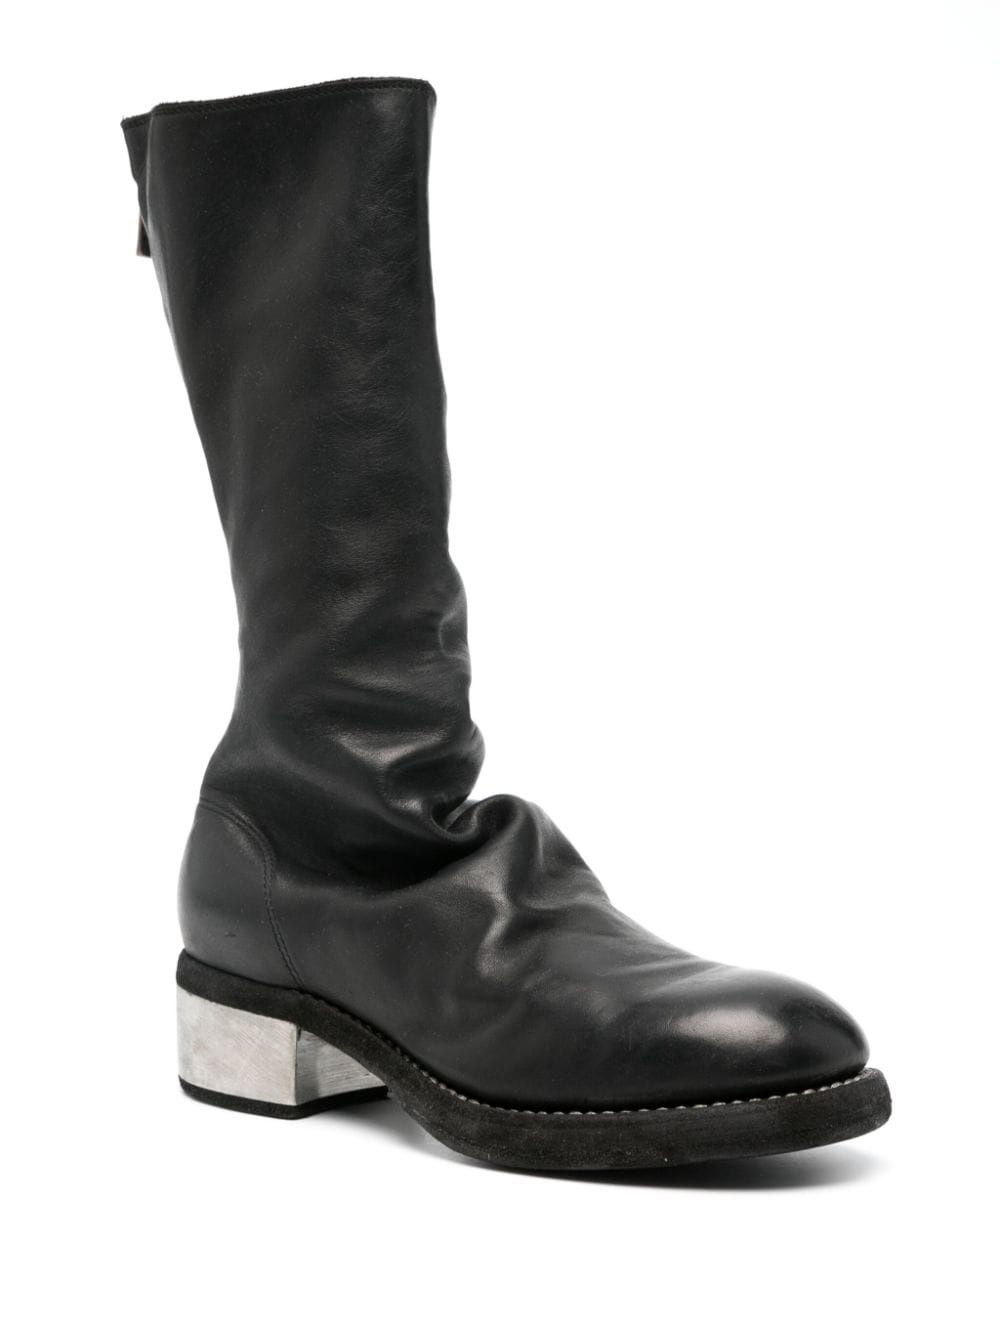 45mm leather boots - 2